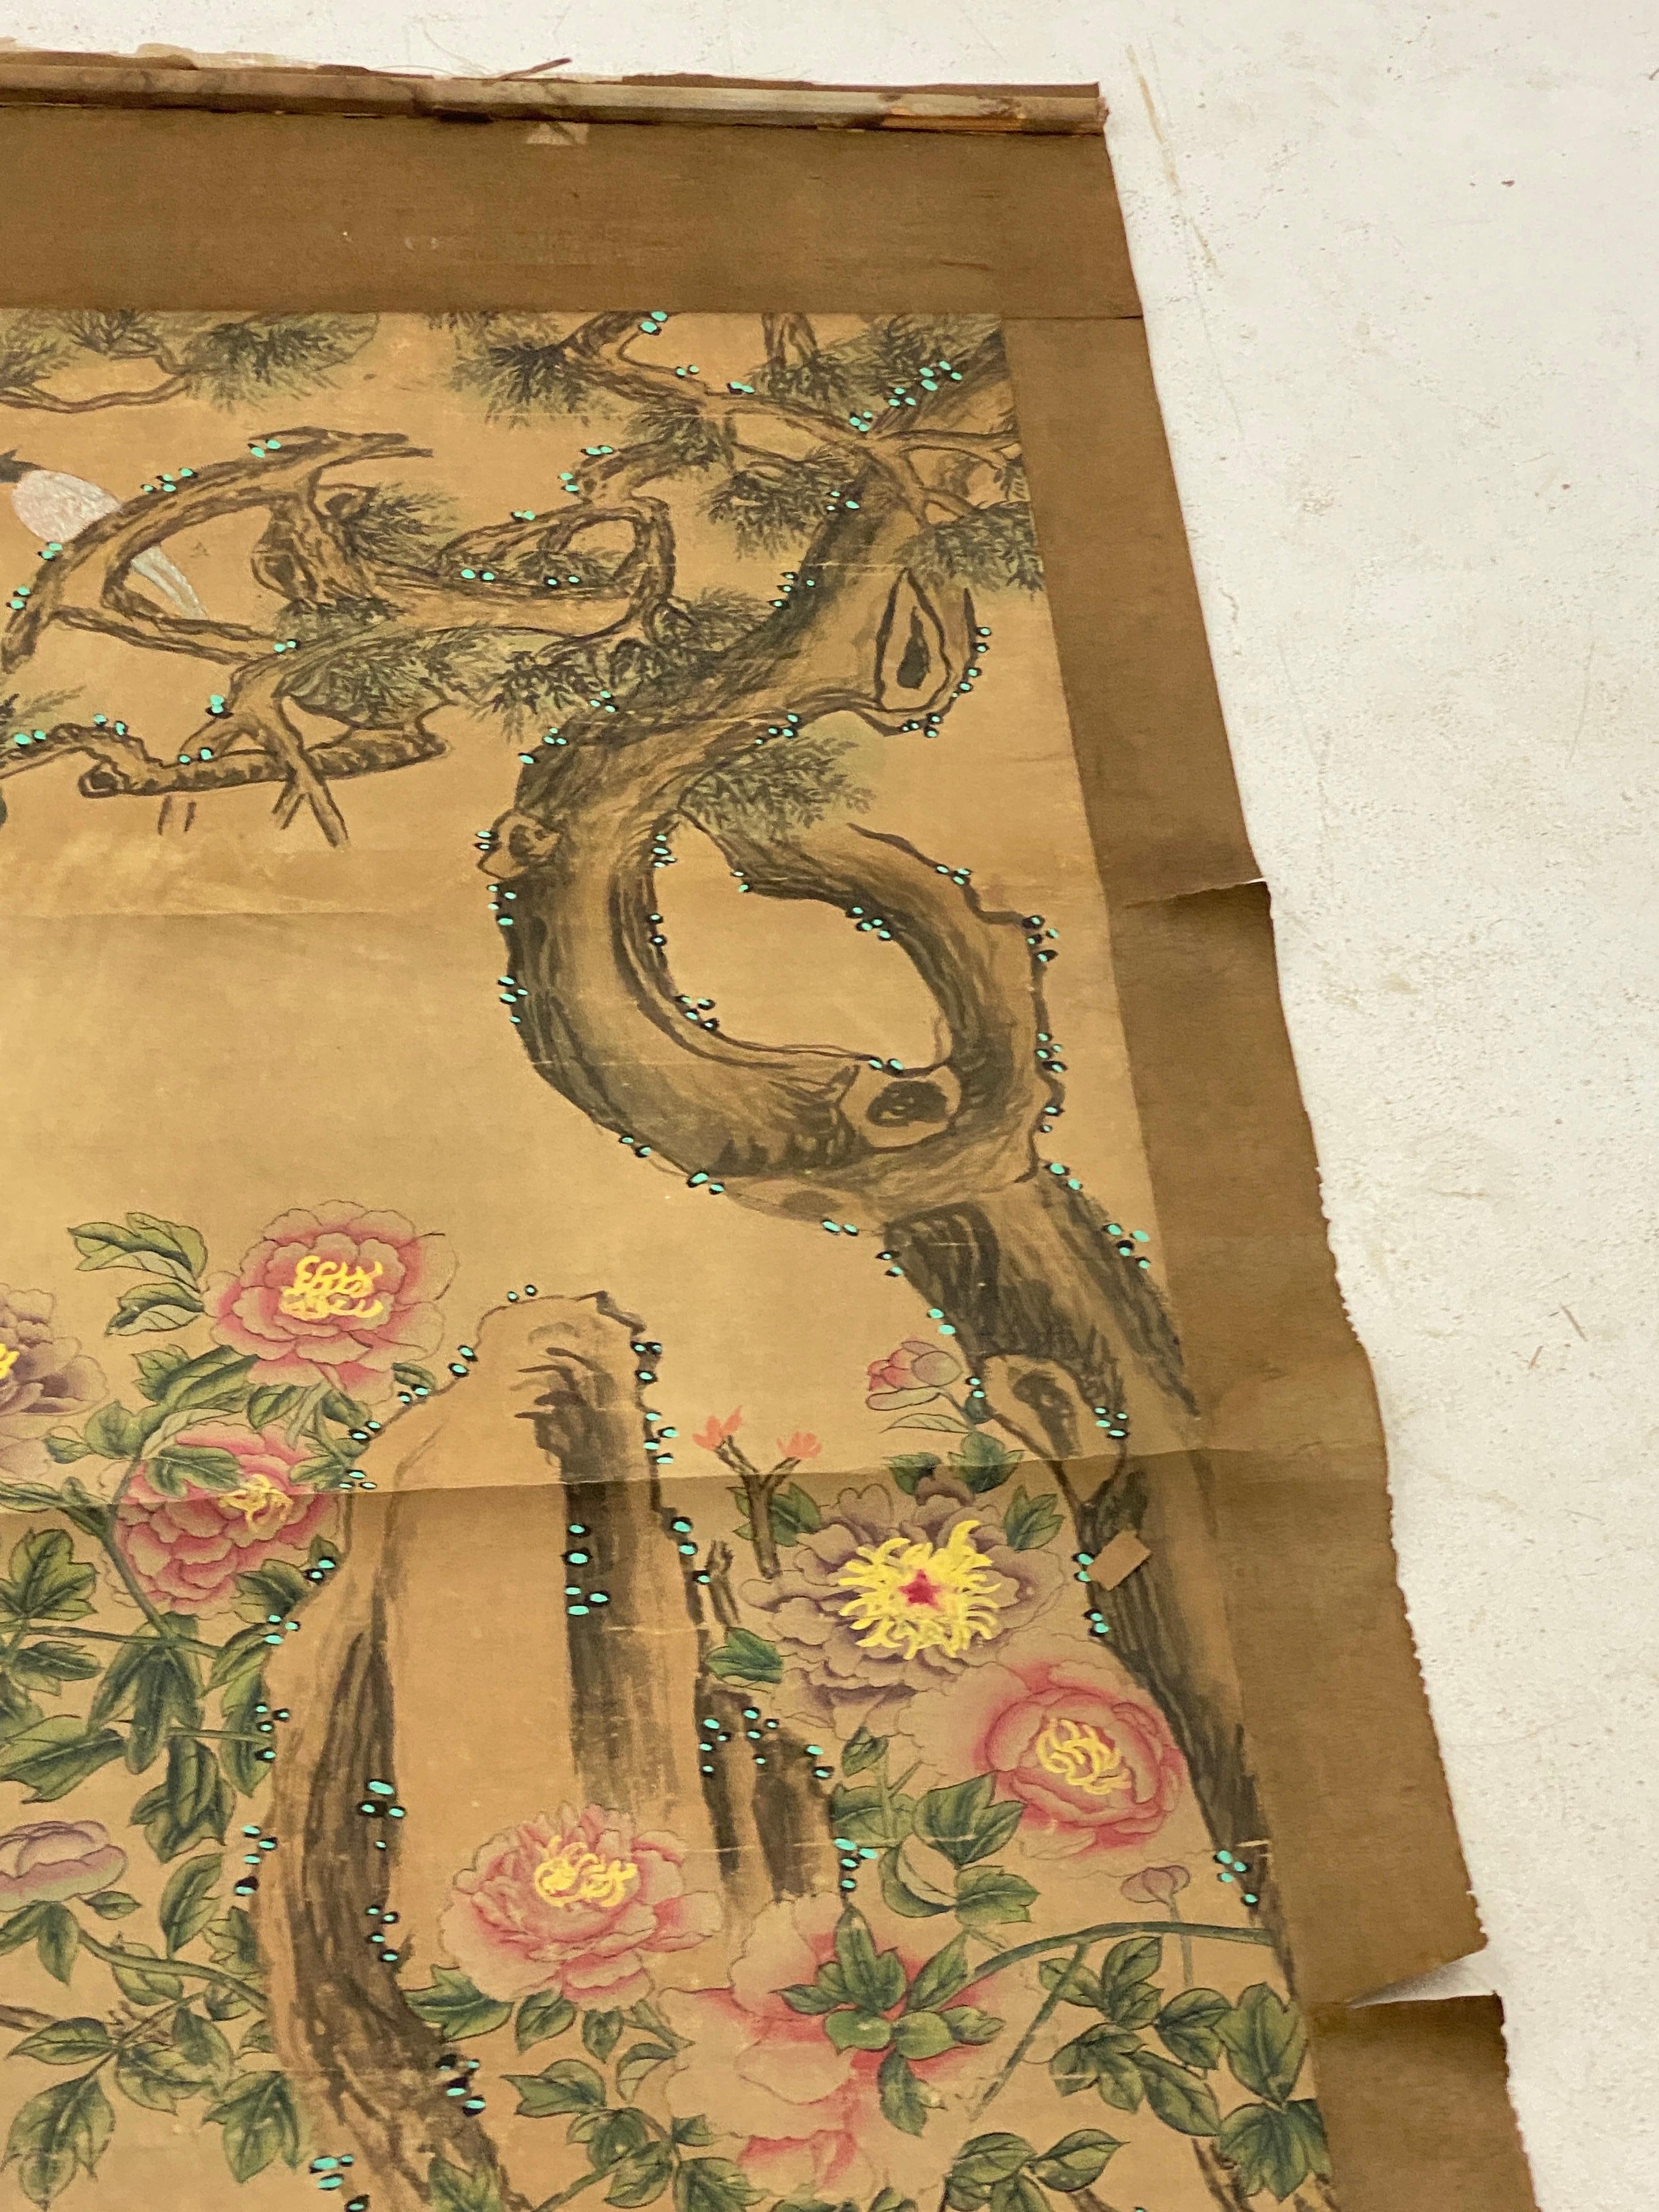 Chinese Export Chinese Painting on Scroll Paper, China 19th Century, Birds and Nature Decor For Sale